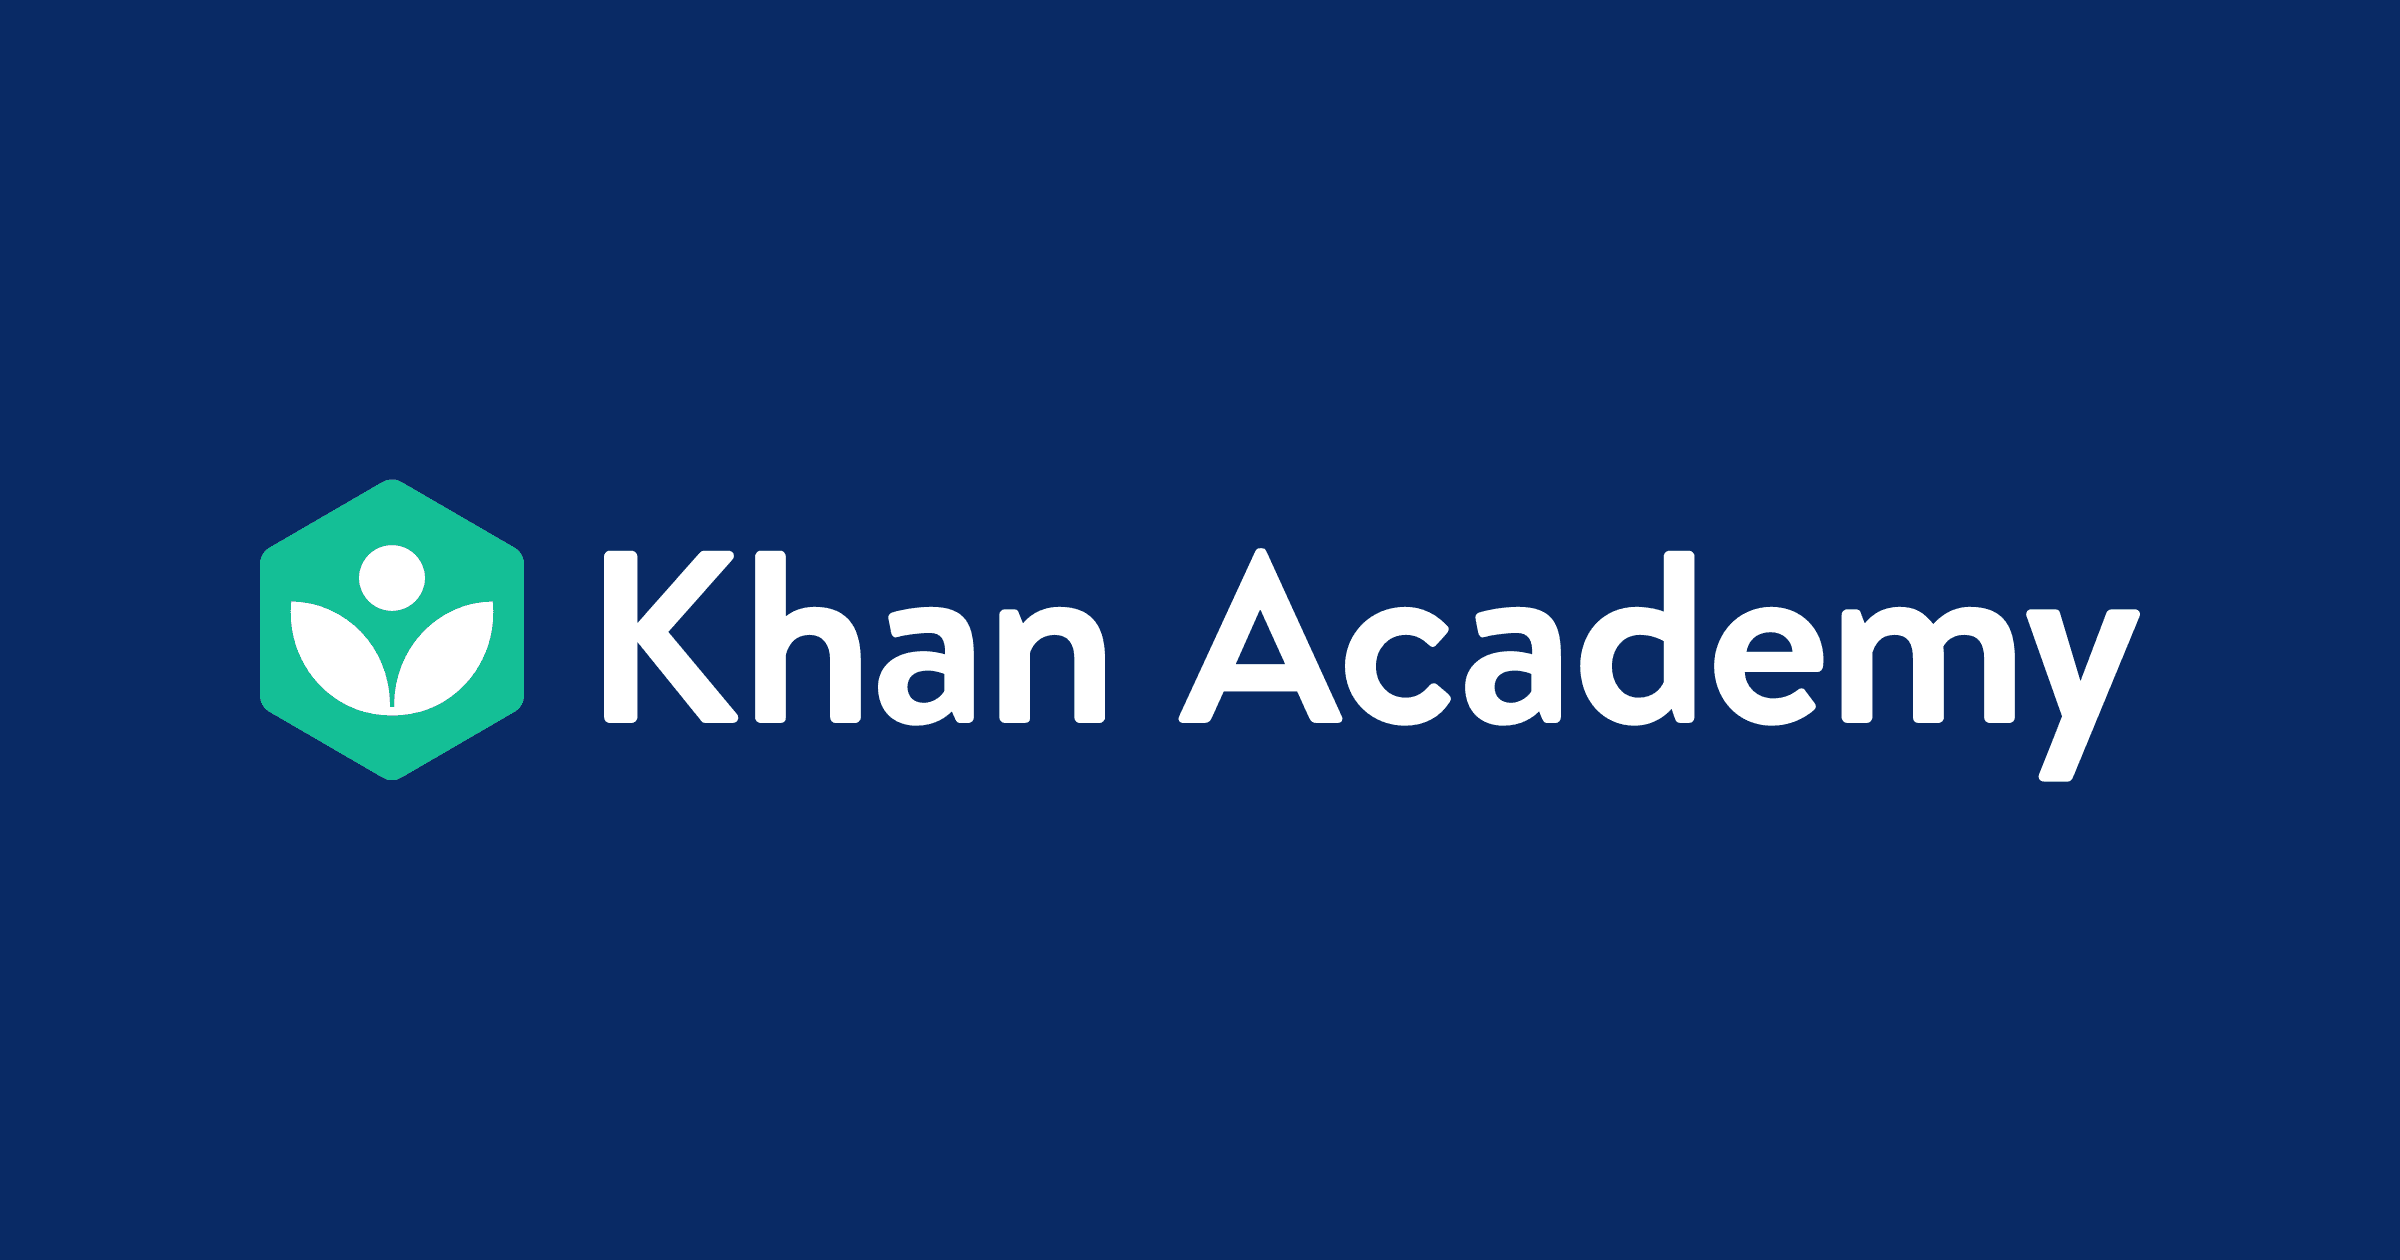 Google Earth App Logo - Khan Academy | Free Online Courses, Lessons & Practice